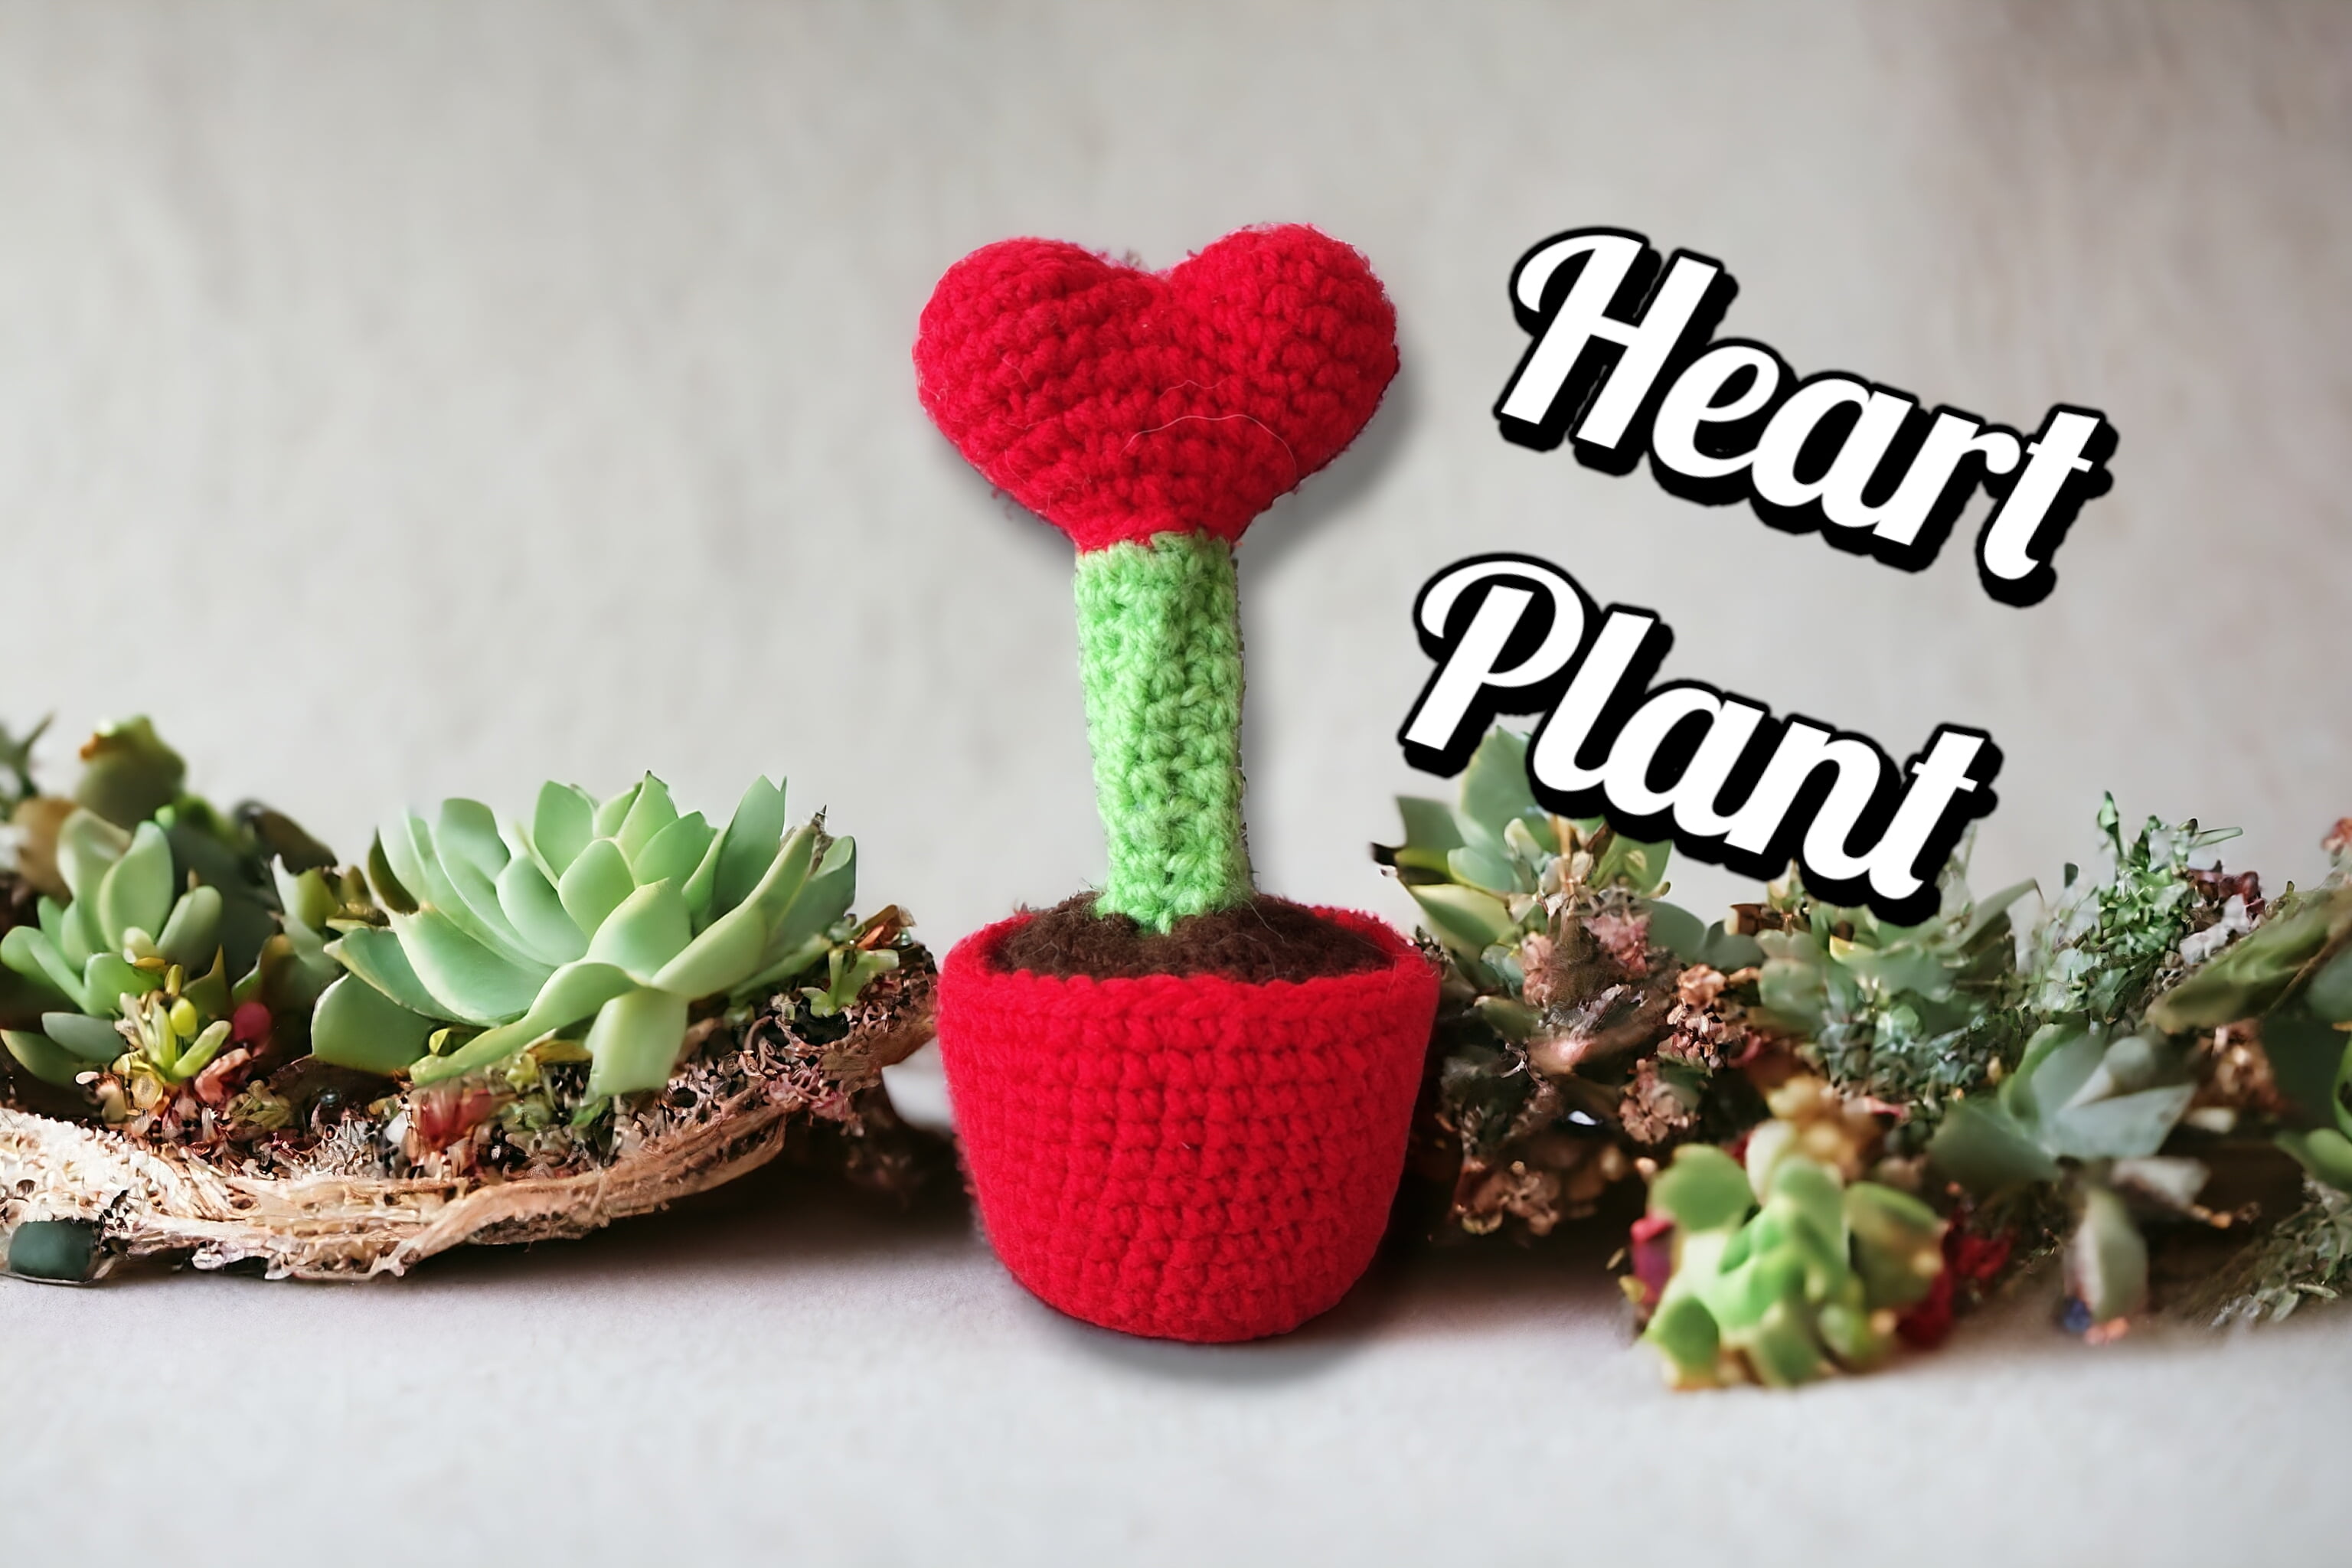 How to Make a Heart Plant with a Removable Pot